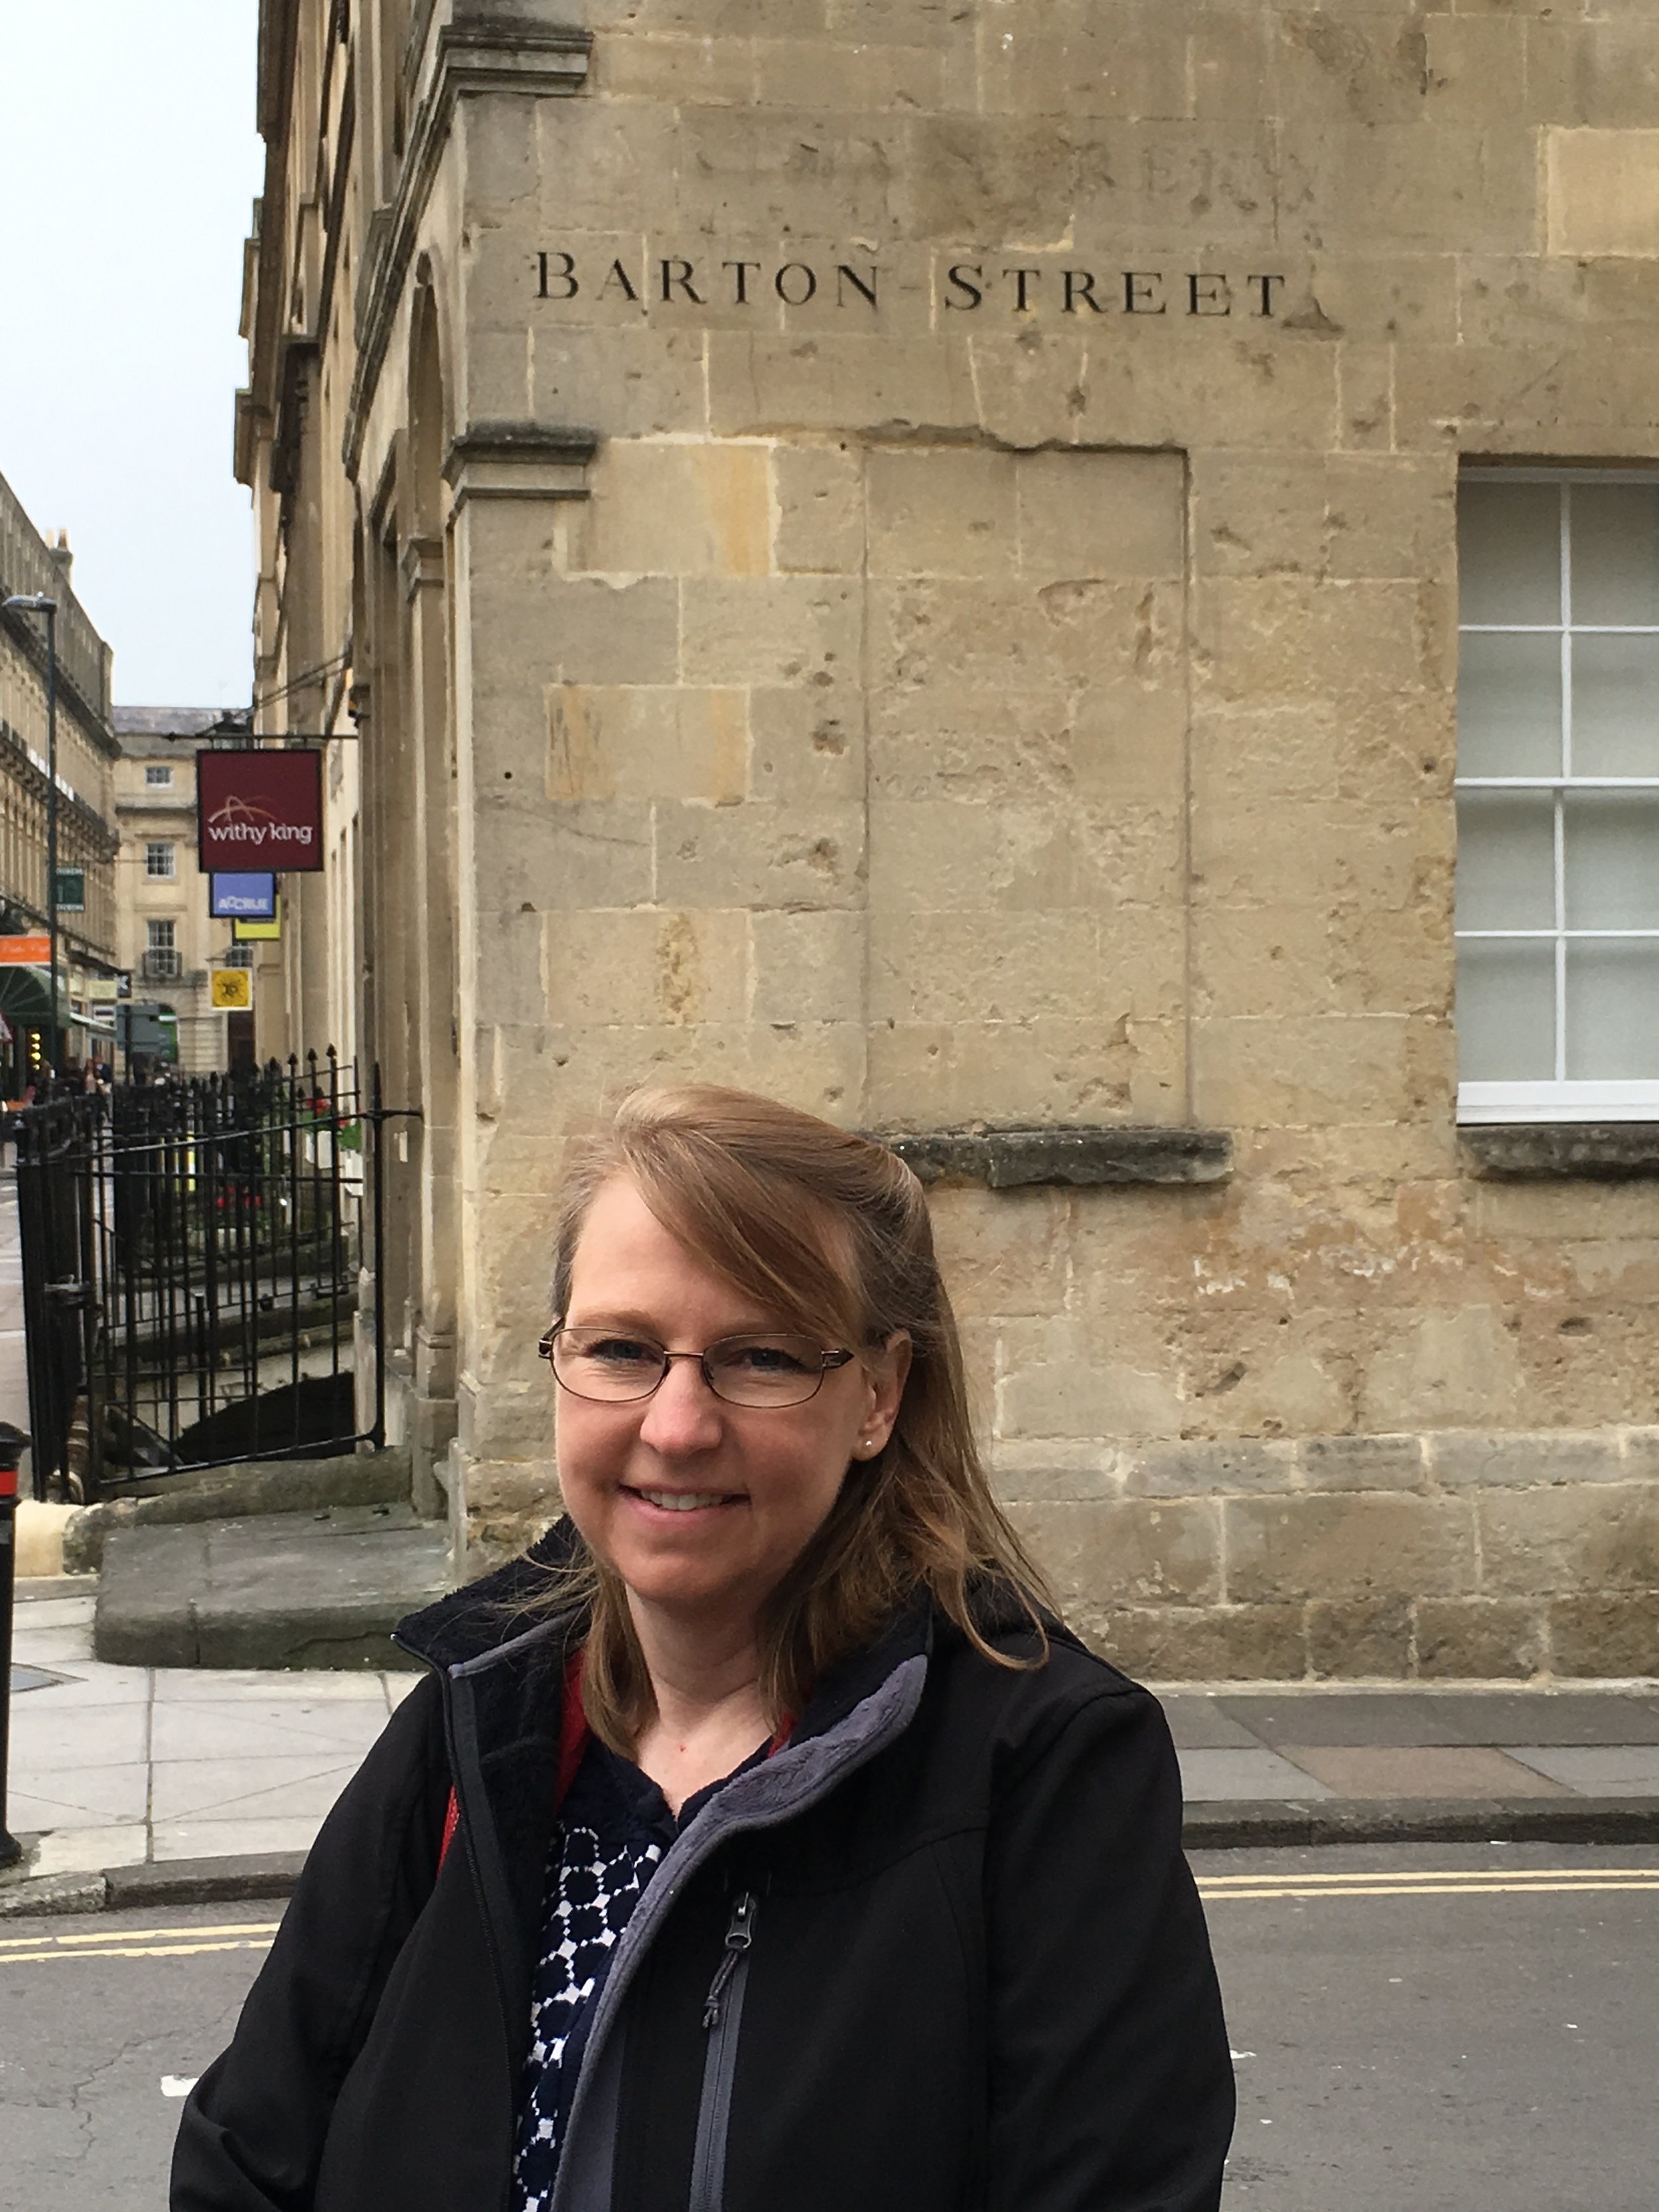  Apparently there was a stonemason with the last name of Barton in Bath, who built a lot of buildings. My mother's maiden name is Barton, so she decided to take a picture with every Barton sign we came across. 